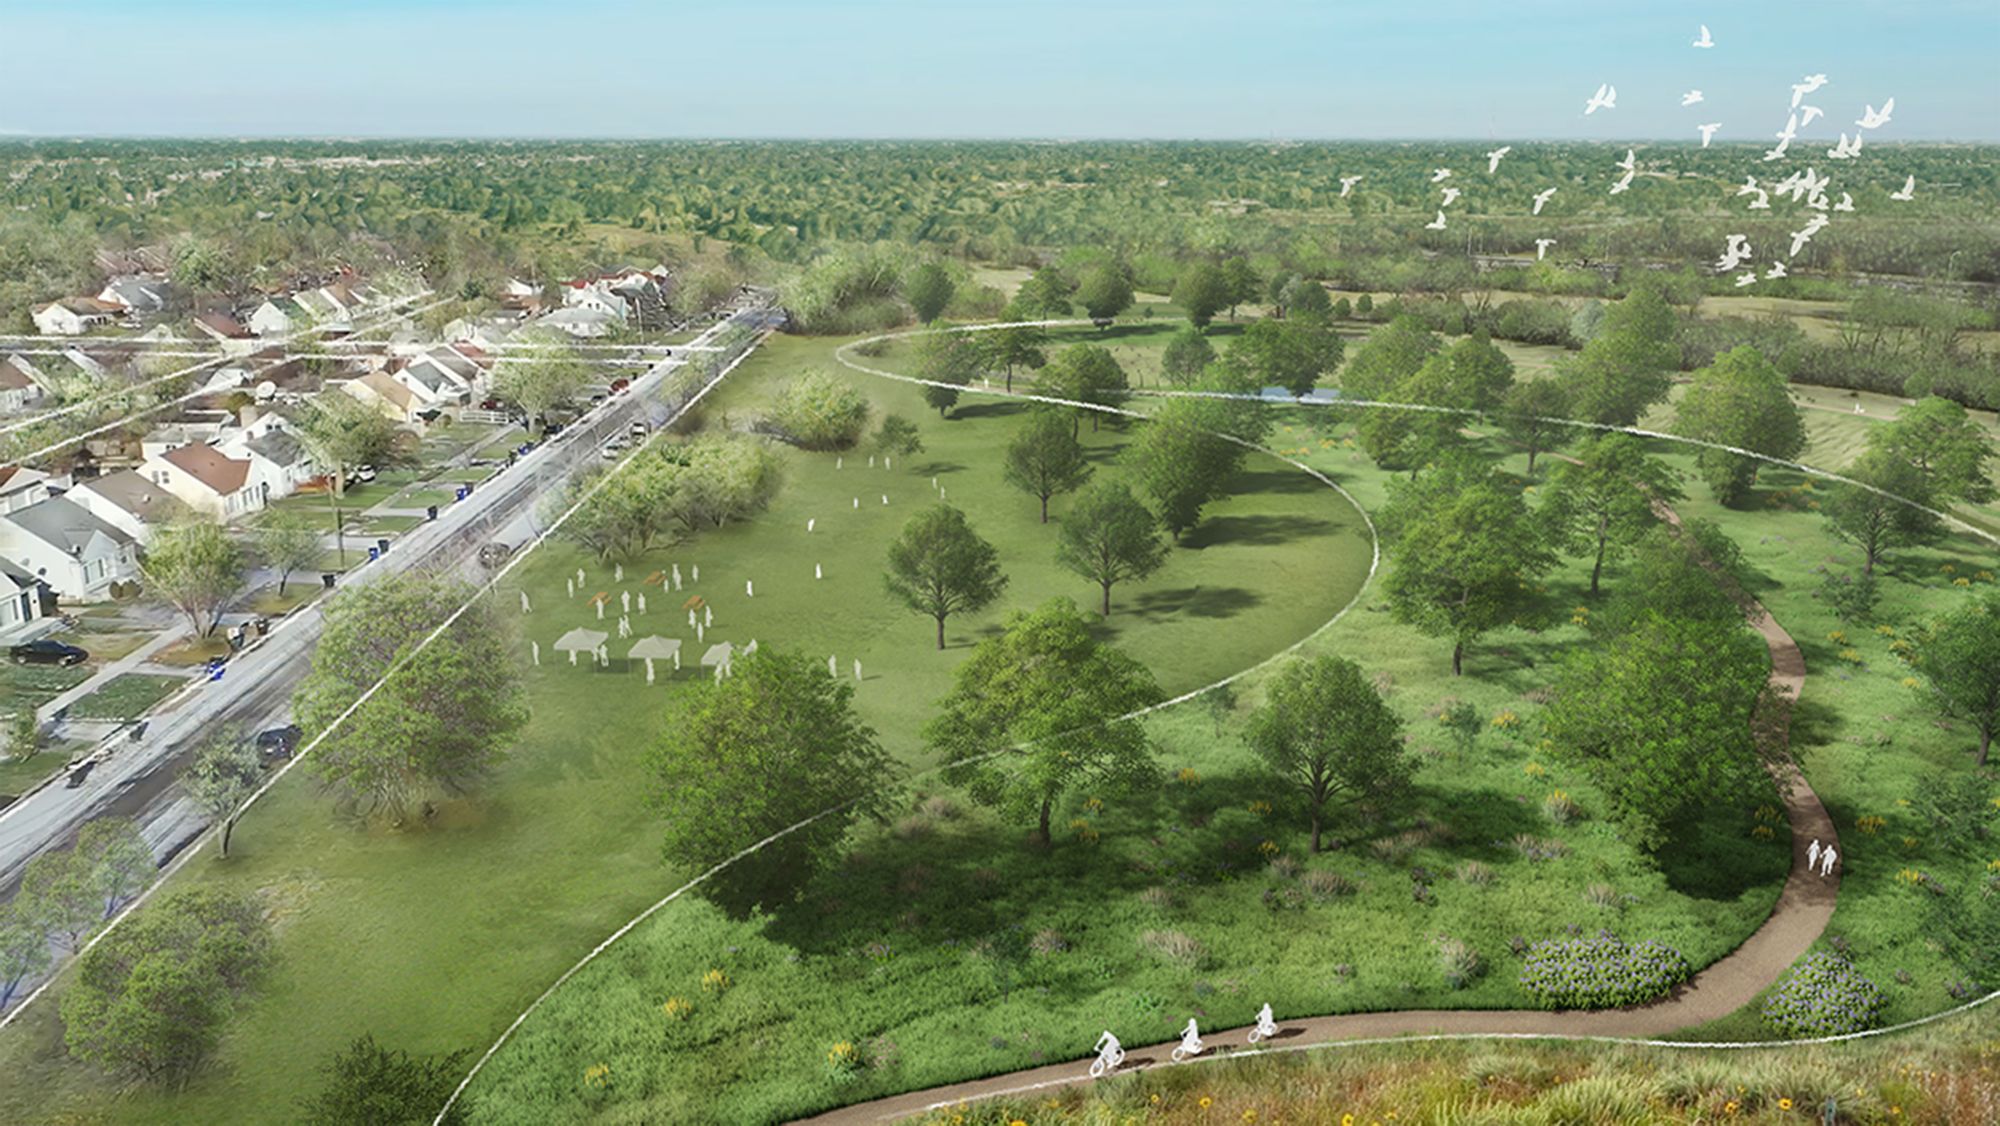 $40m Green Stormwater Infrastructure Project Nears Completion in Detroit